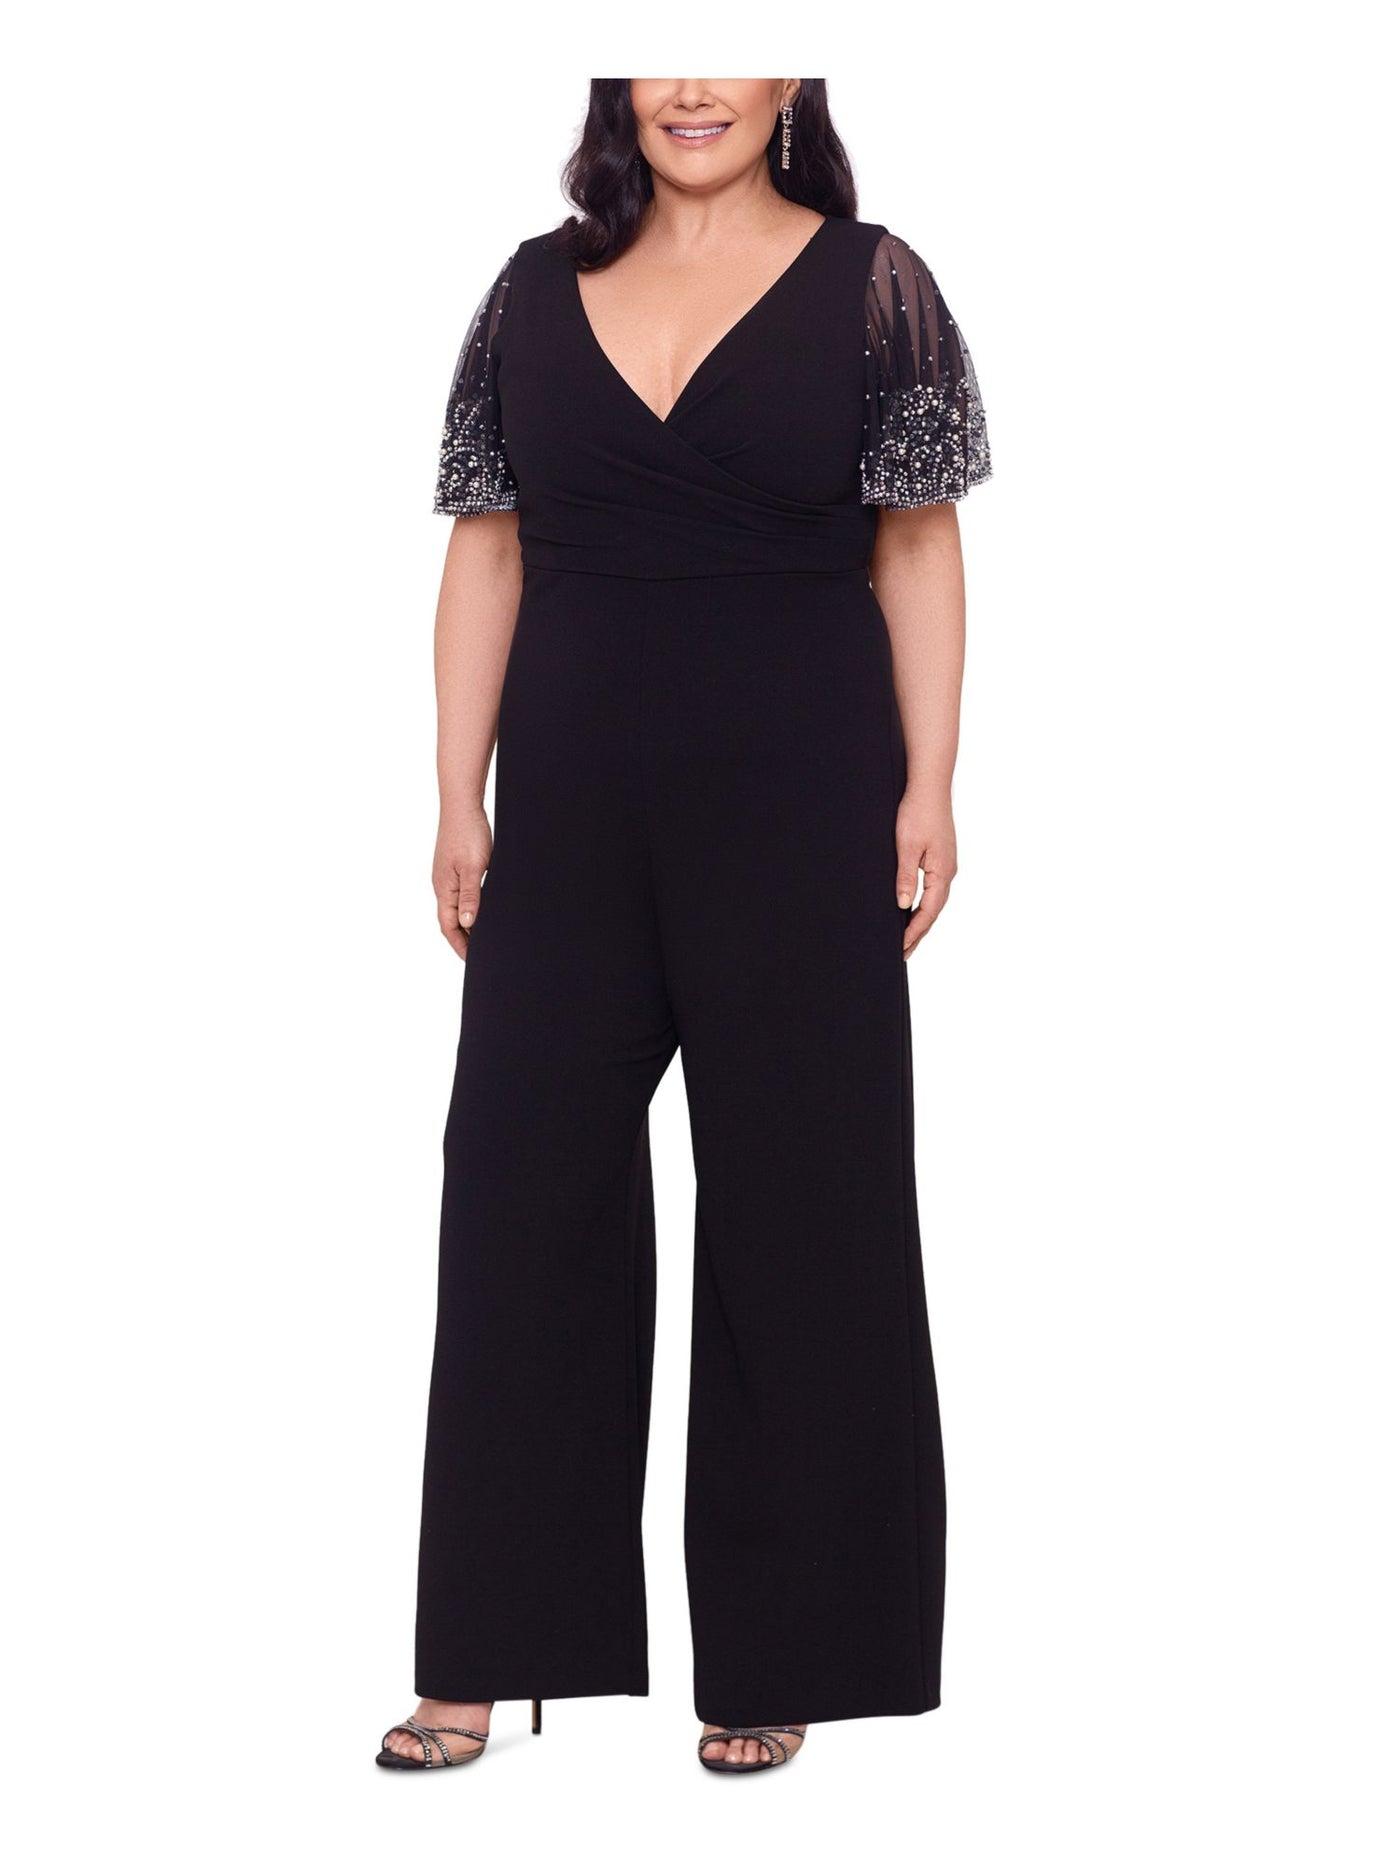 BETSY & ADAM Womens Stretch Embellished Zippered Pleated Flutter Sleeve V Neck Party Wide Leg Jumpsuit